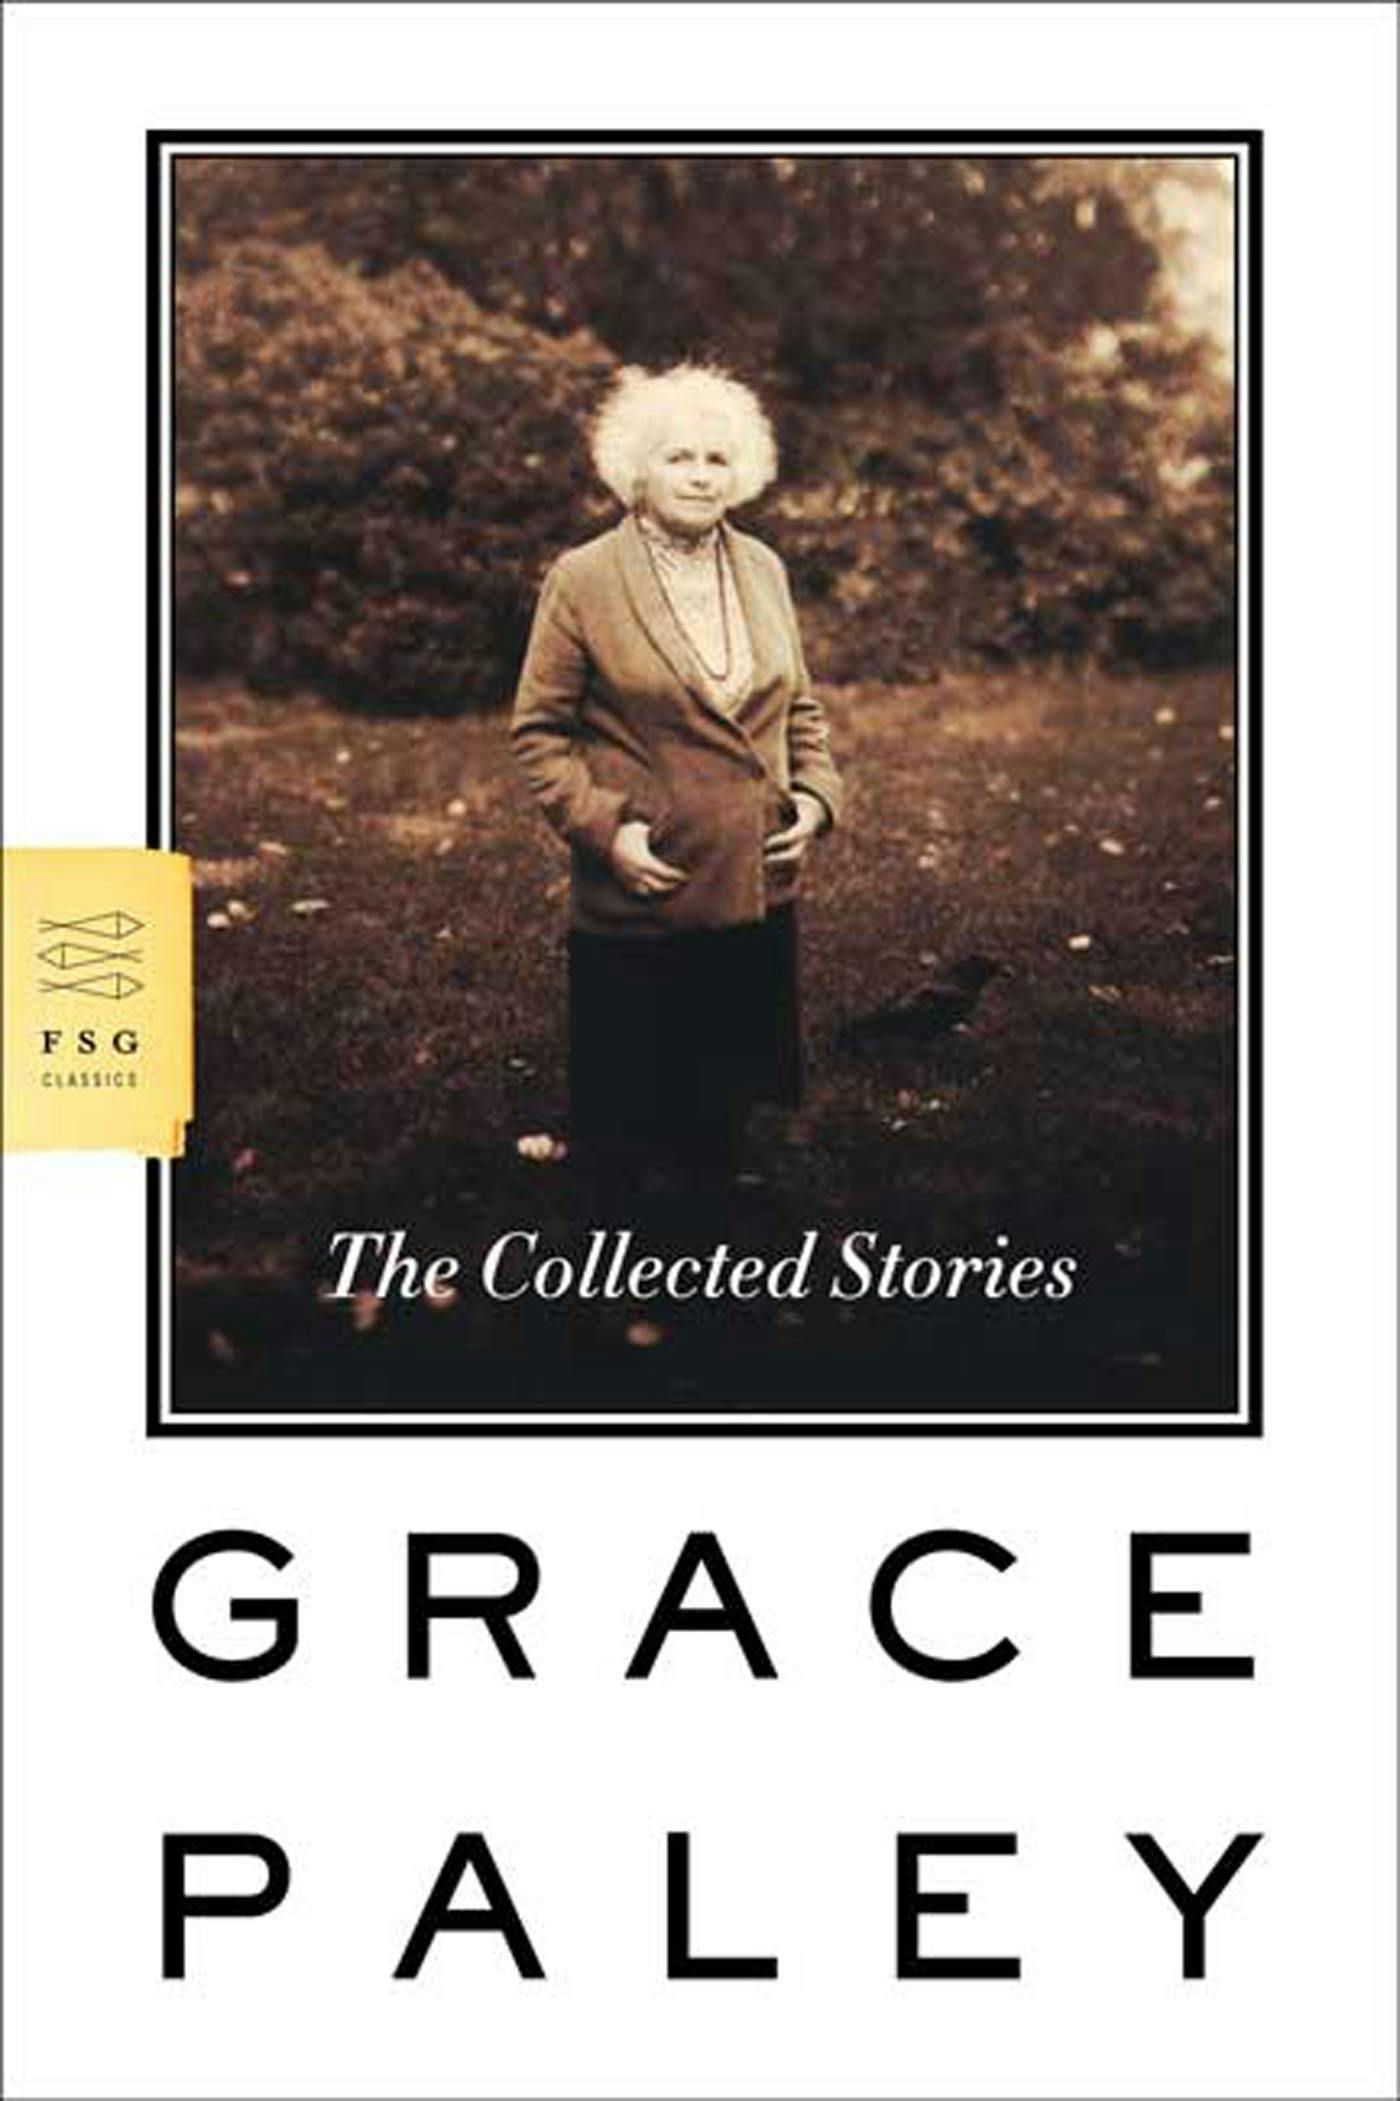 Image of The Collected Stories